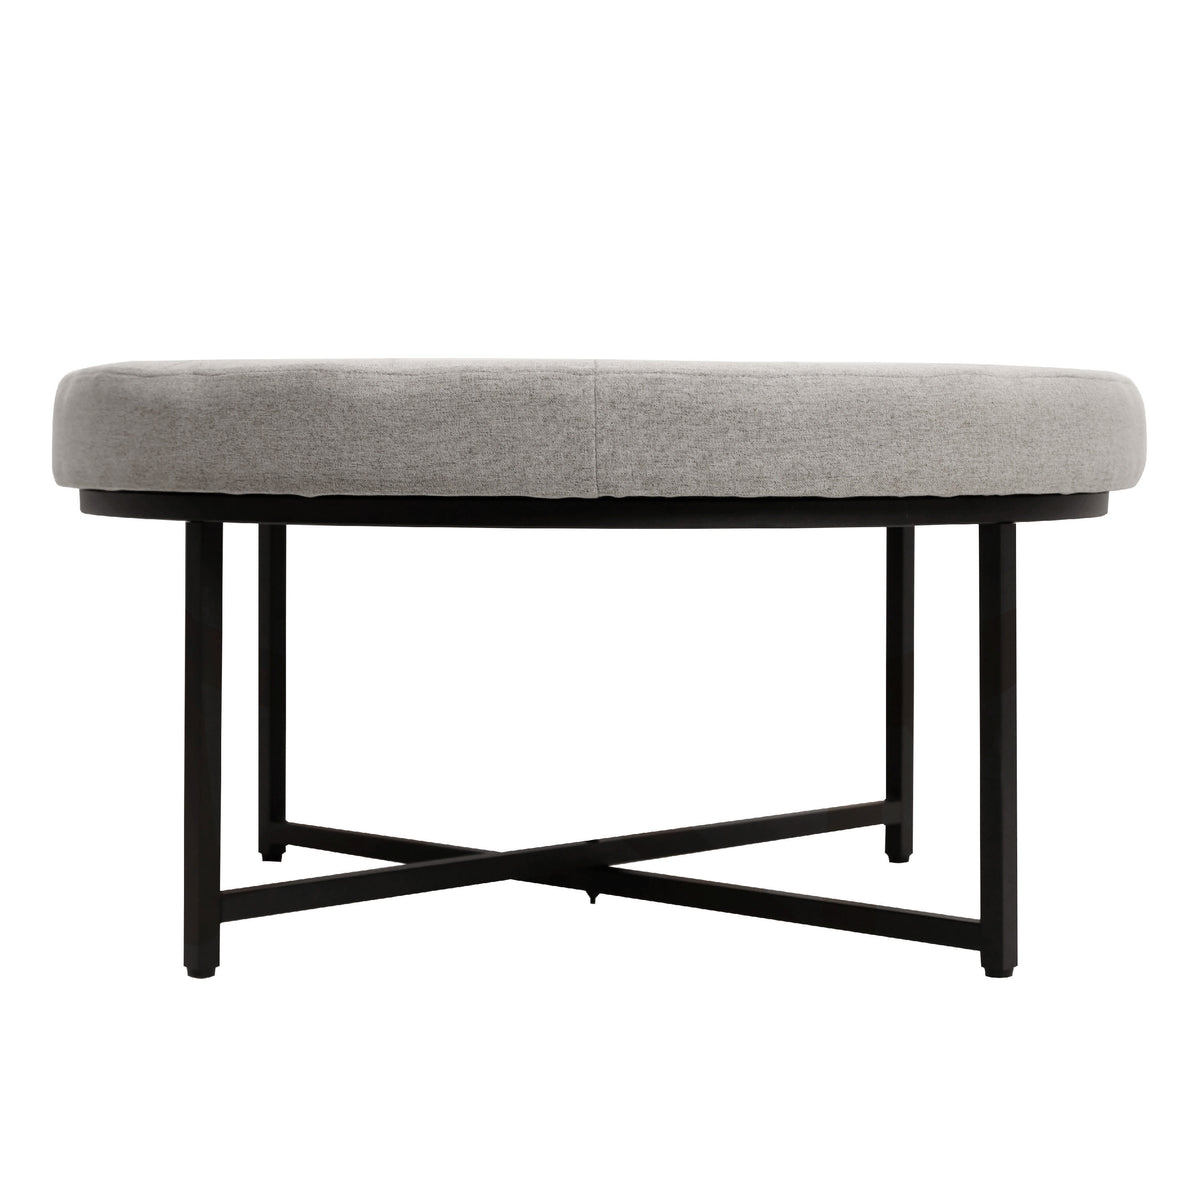 Gray |#| Round Cotton Linen Tufted Ottoman with Black Metal Frame in Gray